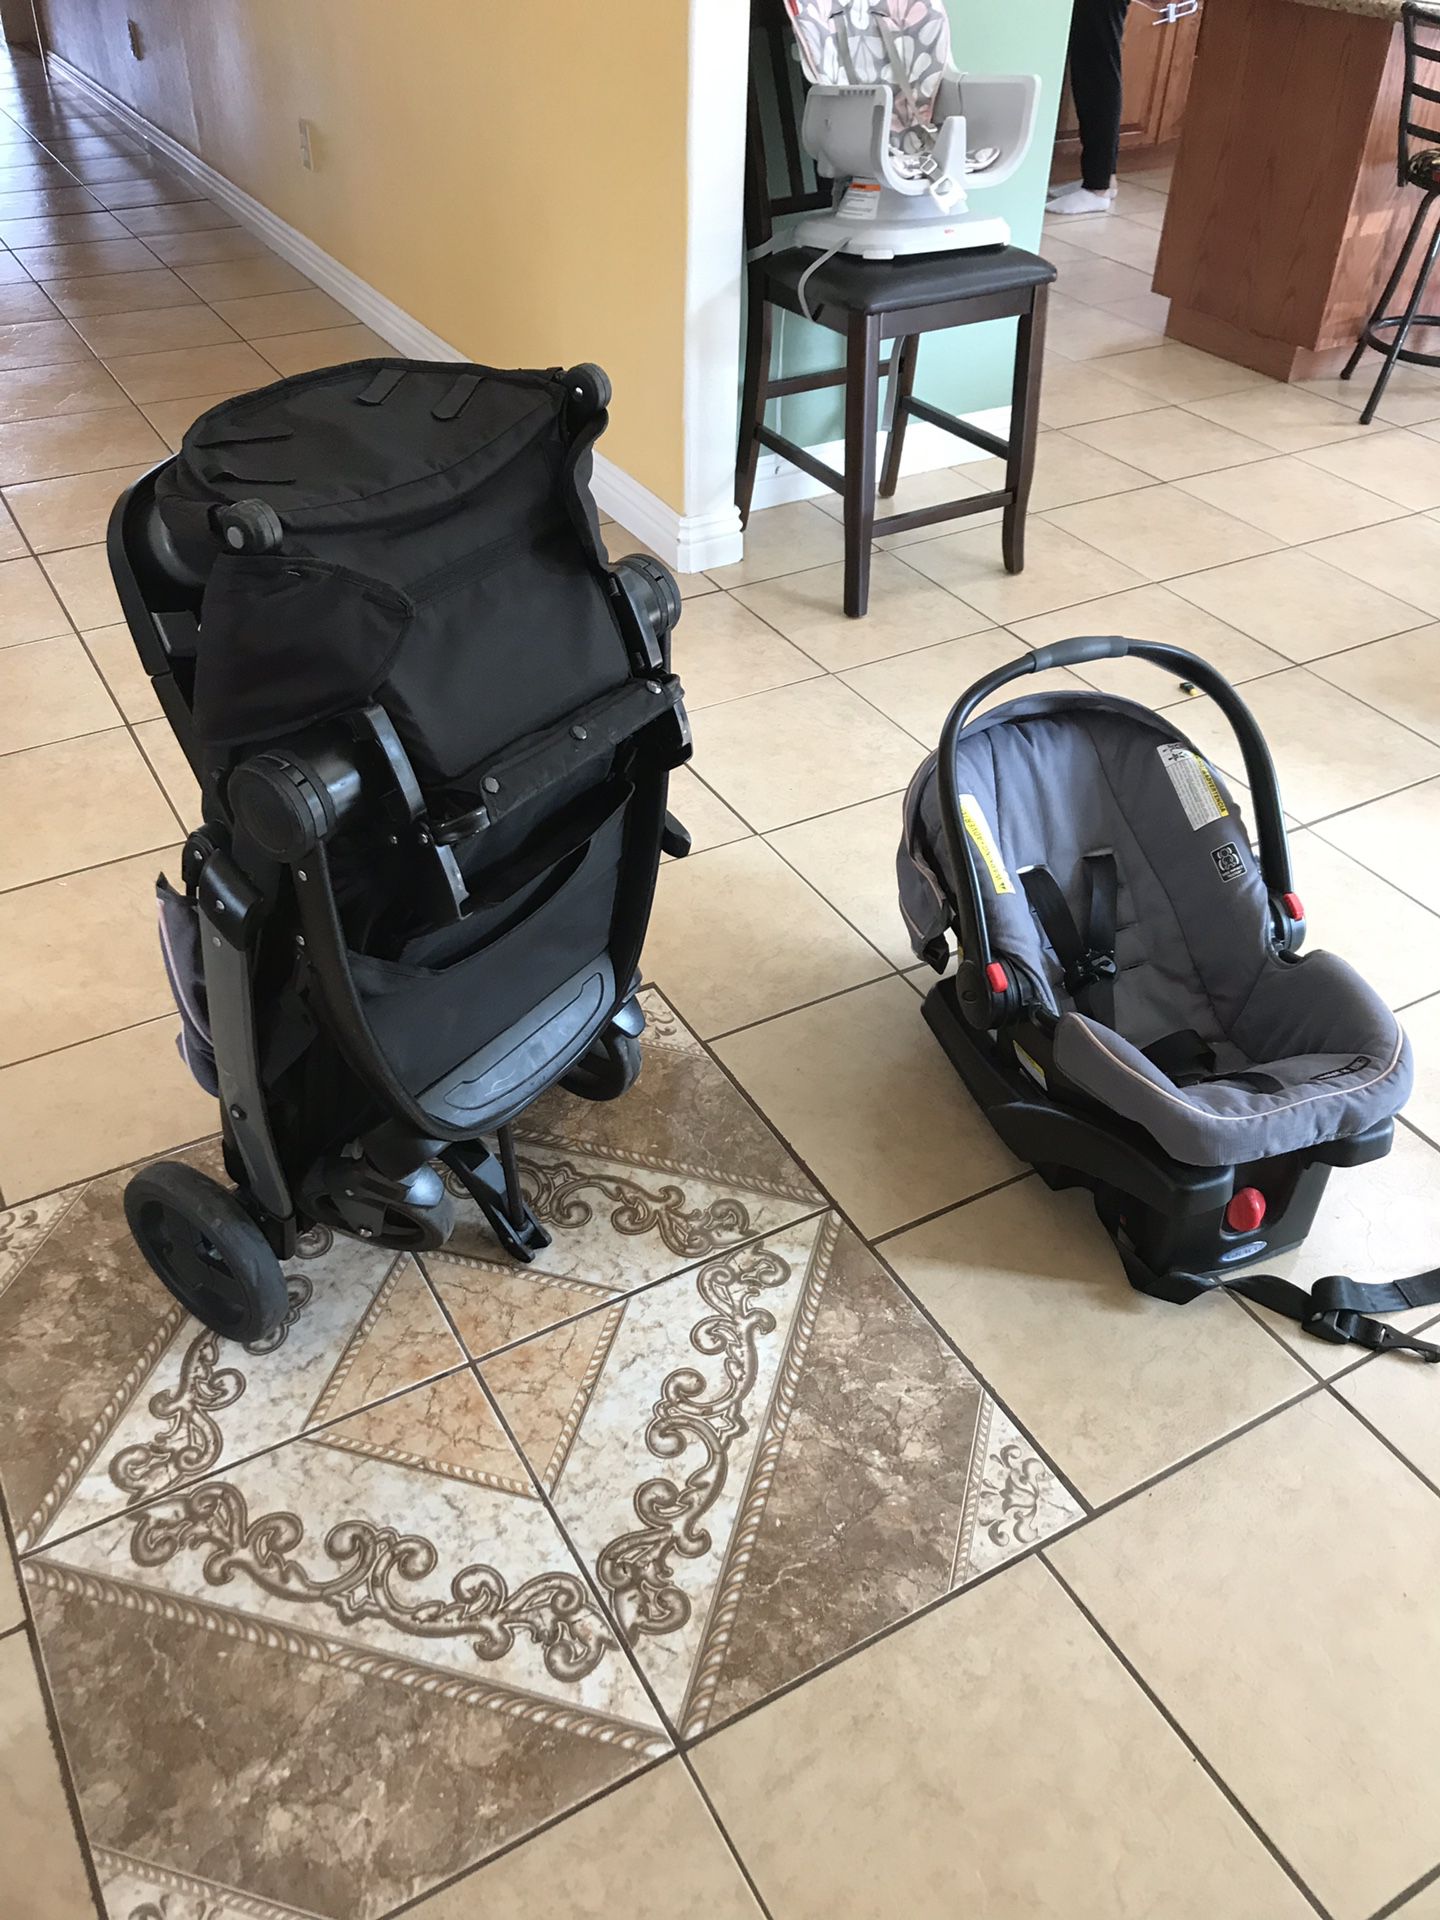 Almost new car seat with stroller